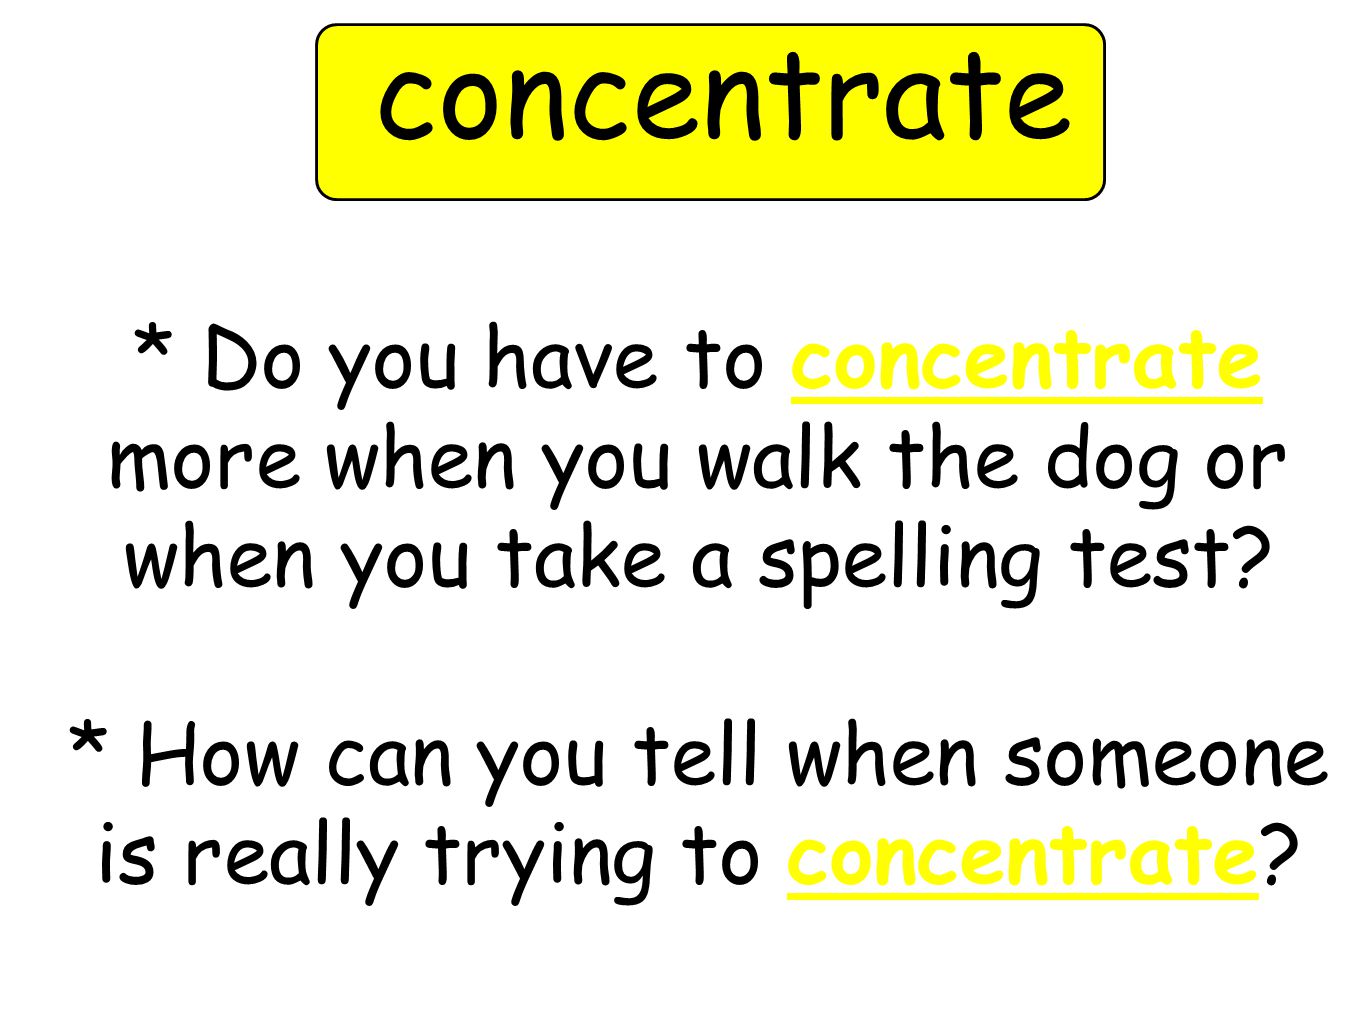 * Do you have to concentrate more when you walk the dog or when you take a spelling test.